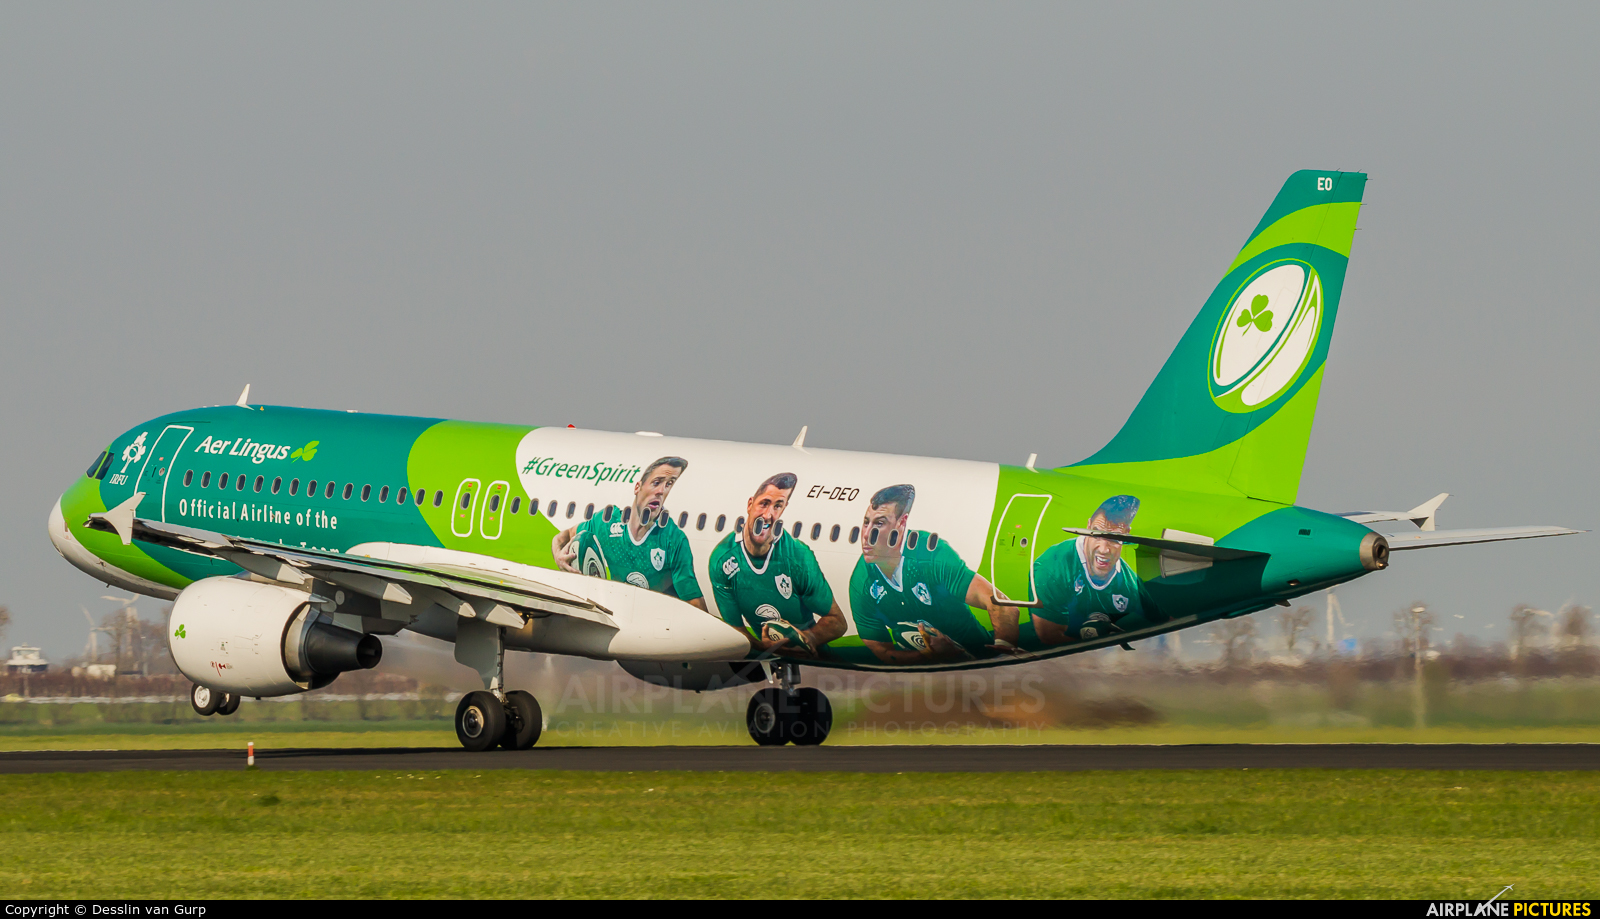 Aer Lingus EI-DEO aircraft at Amsterdam - Schiphol